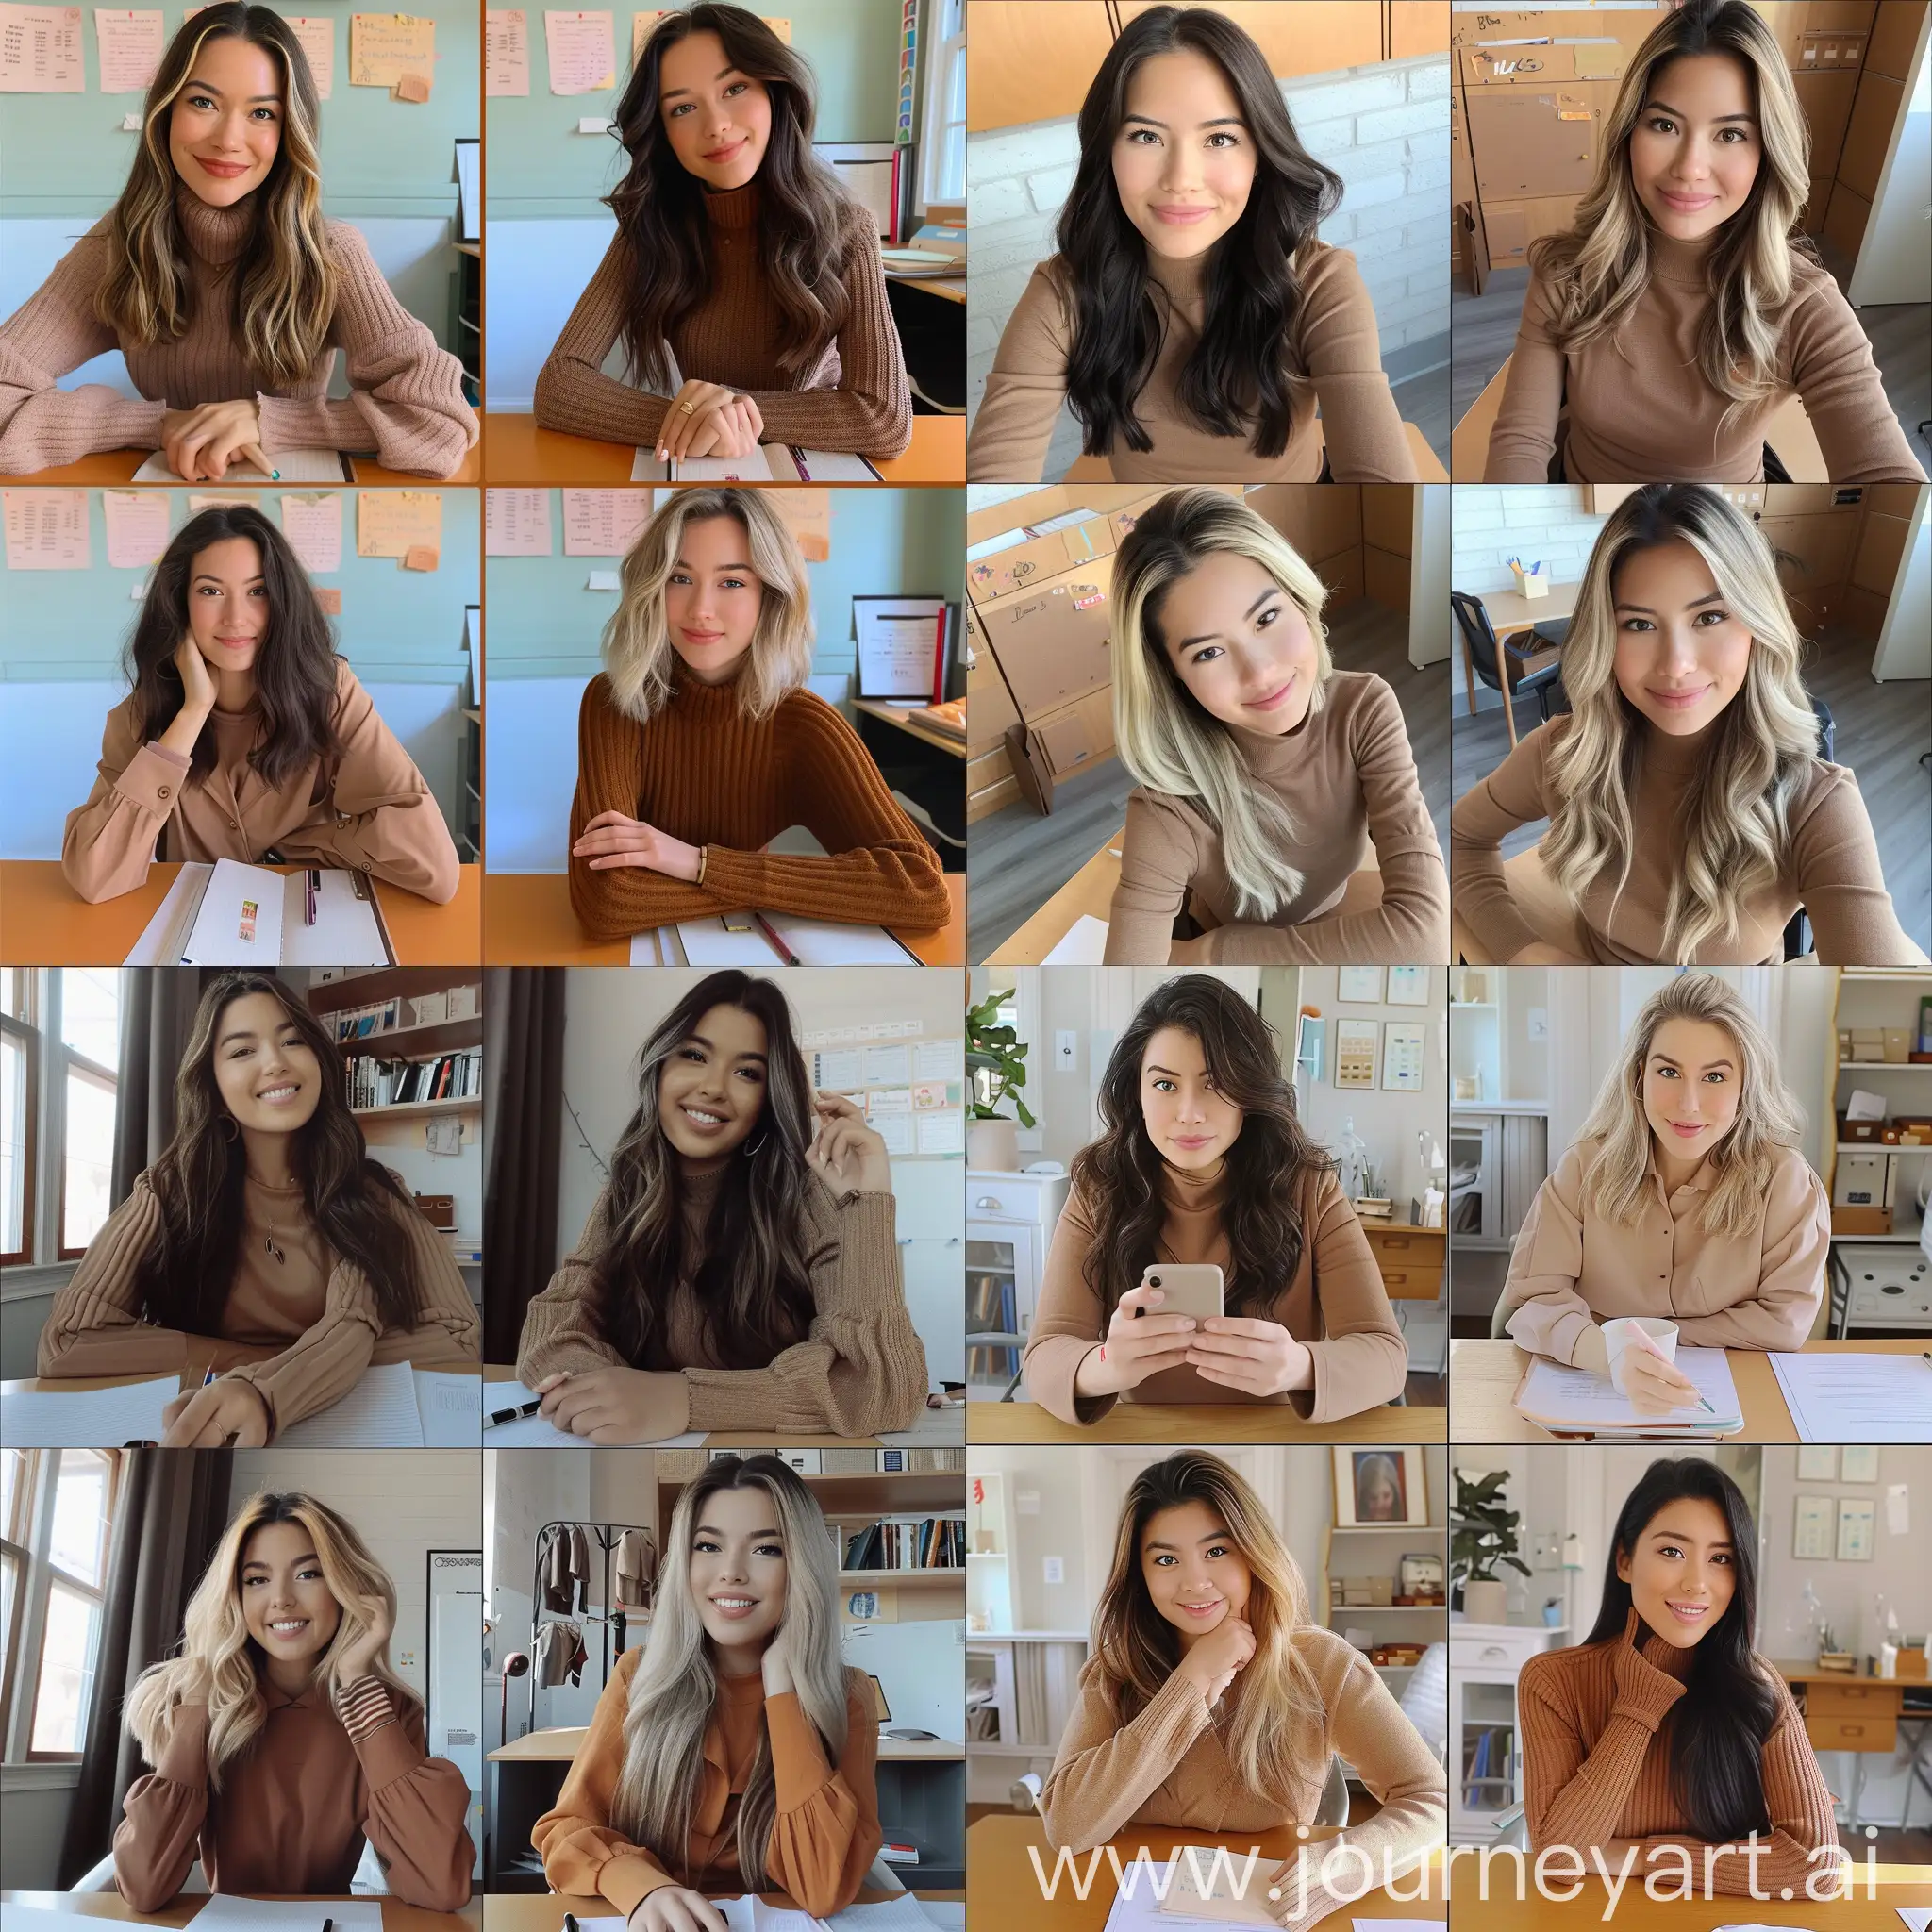 Aesthetic instagram selfie of a Elementary School teacher, woman, at desk, different hair, different ethnicities, 4 images, soft brown clothing color tones--ar 9:16